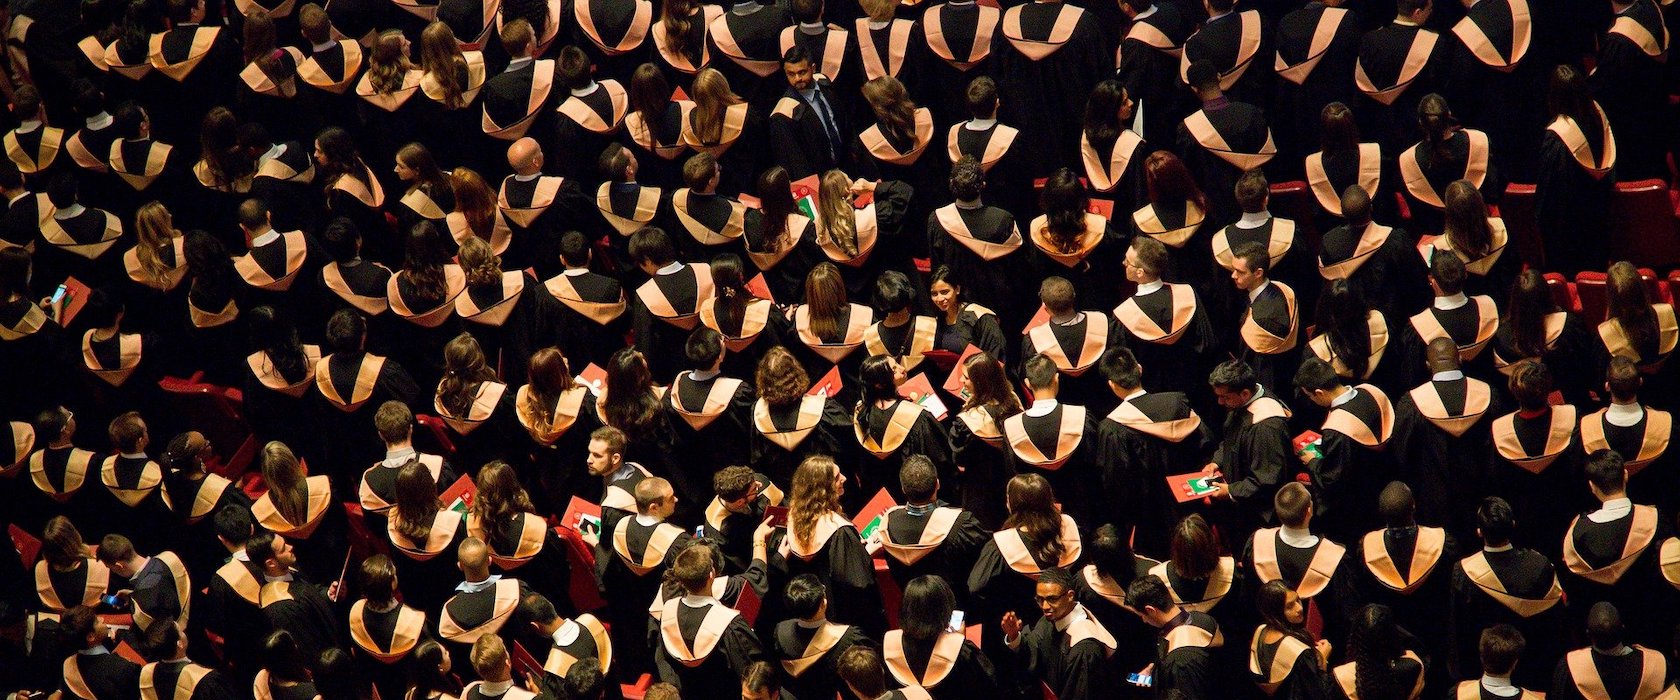 An overhead view of a large group of students in graduation gowns at a ceremony